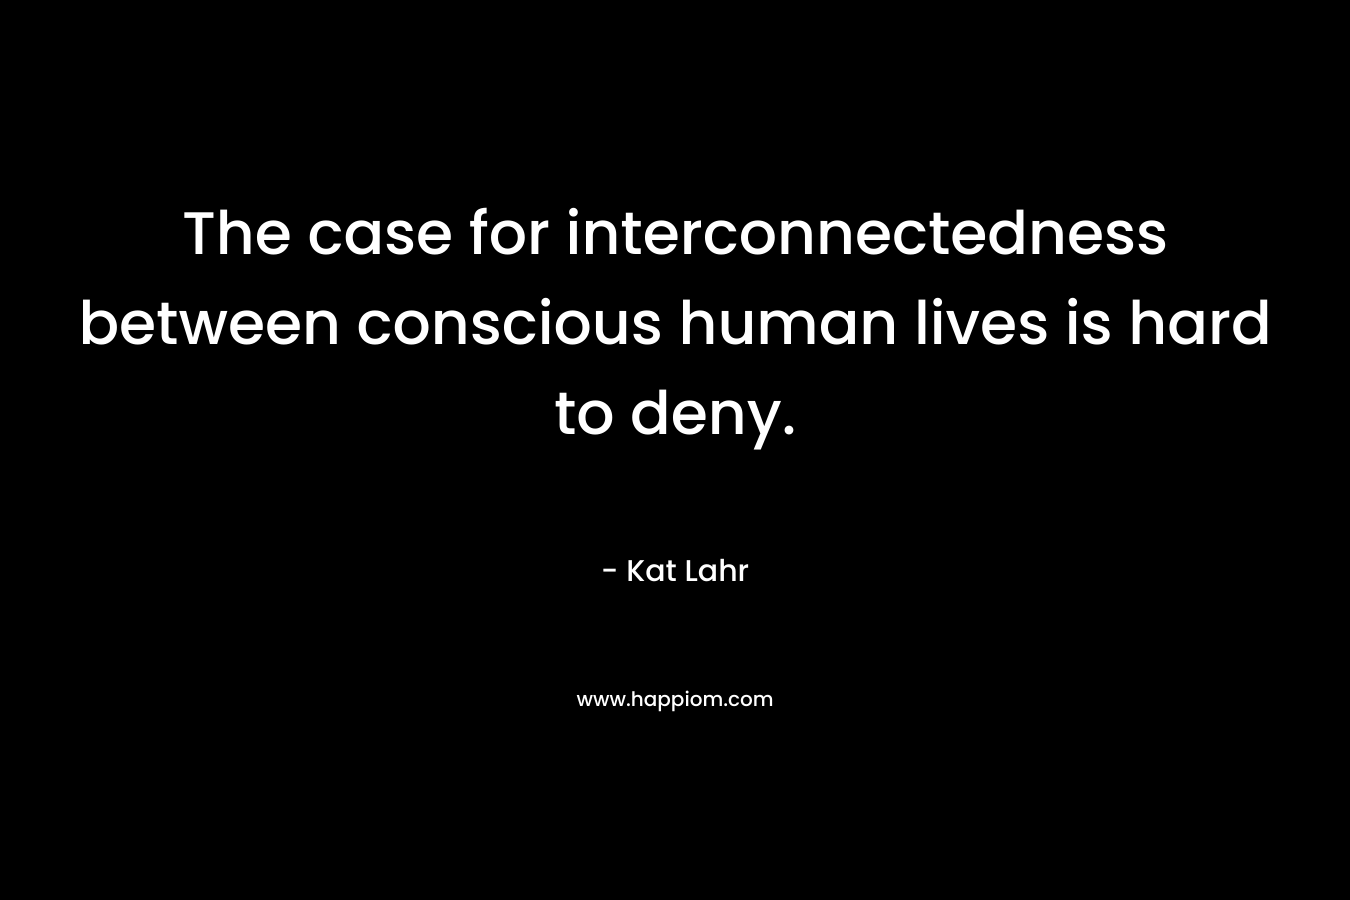 The case for interconnectedness between conscious human lives is hard to deny. – Kat Lahr